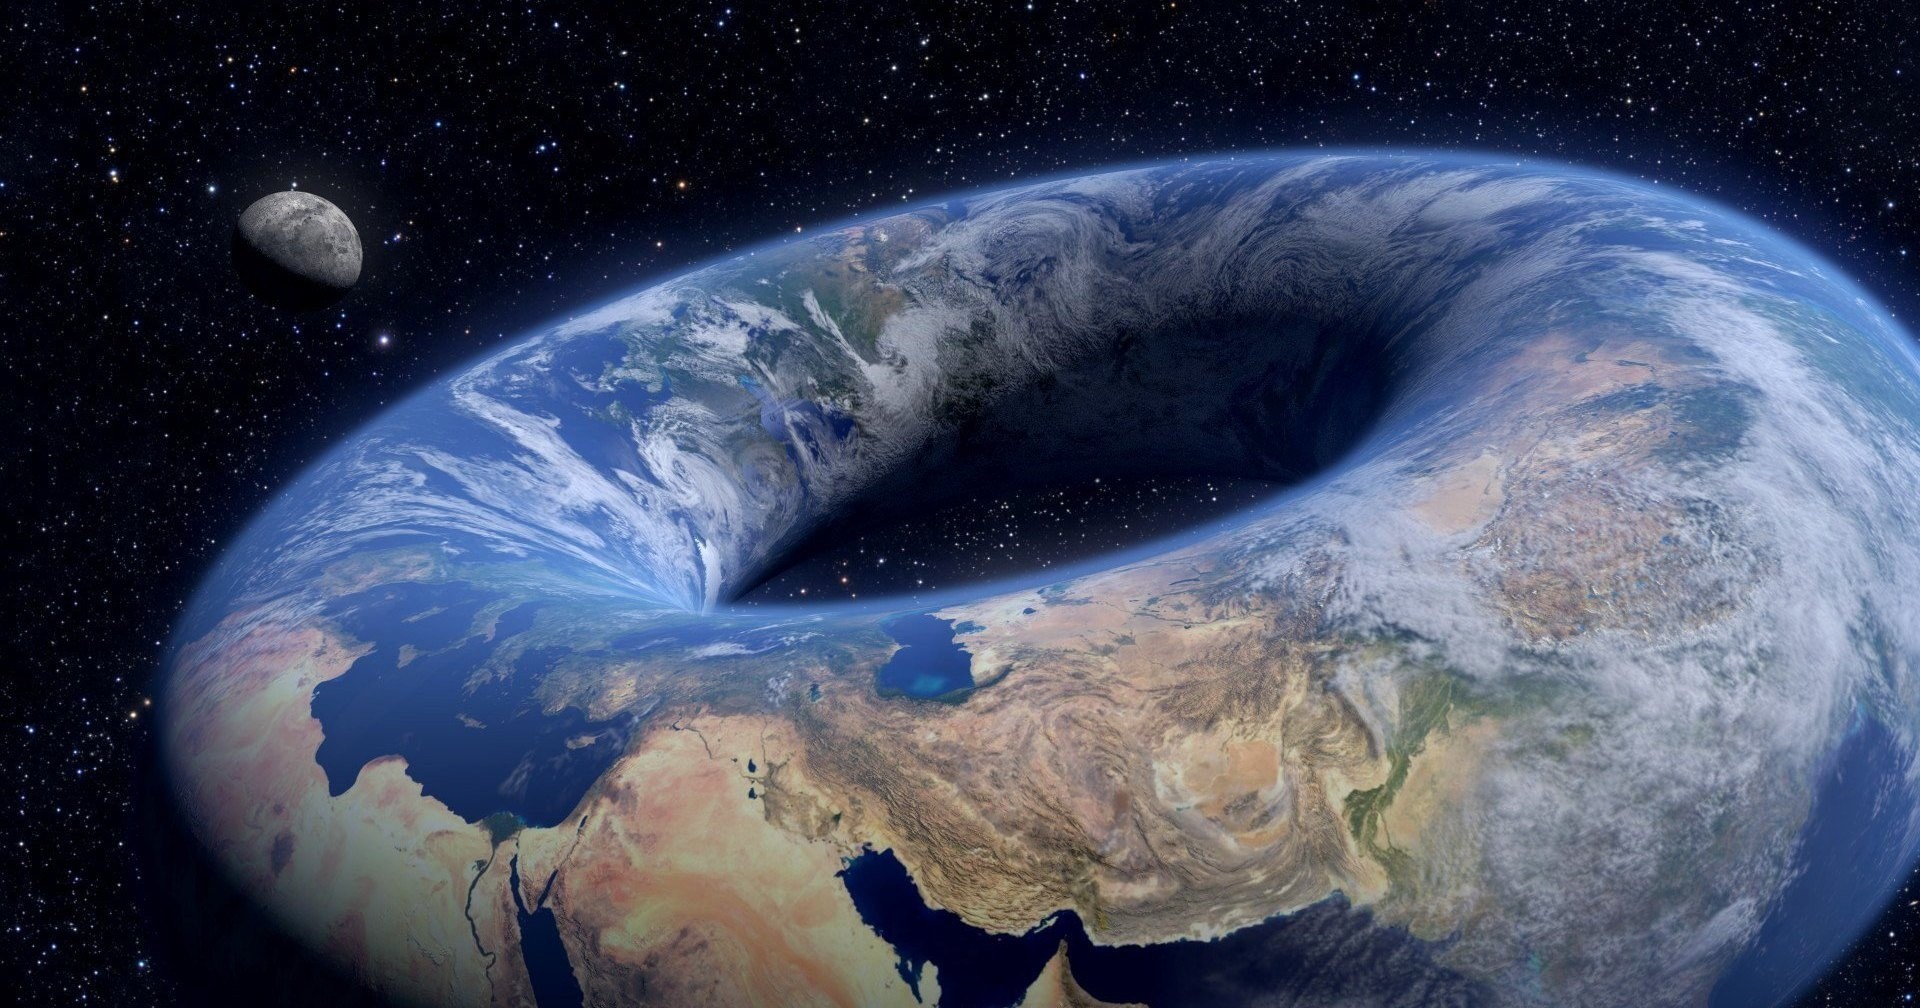 Earth may have been shaped like a donut at one point in time